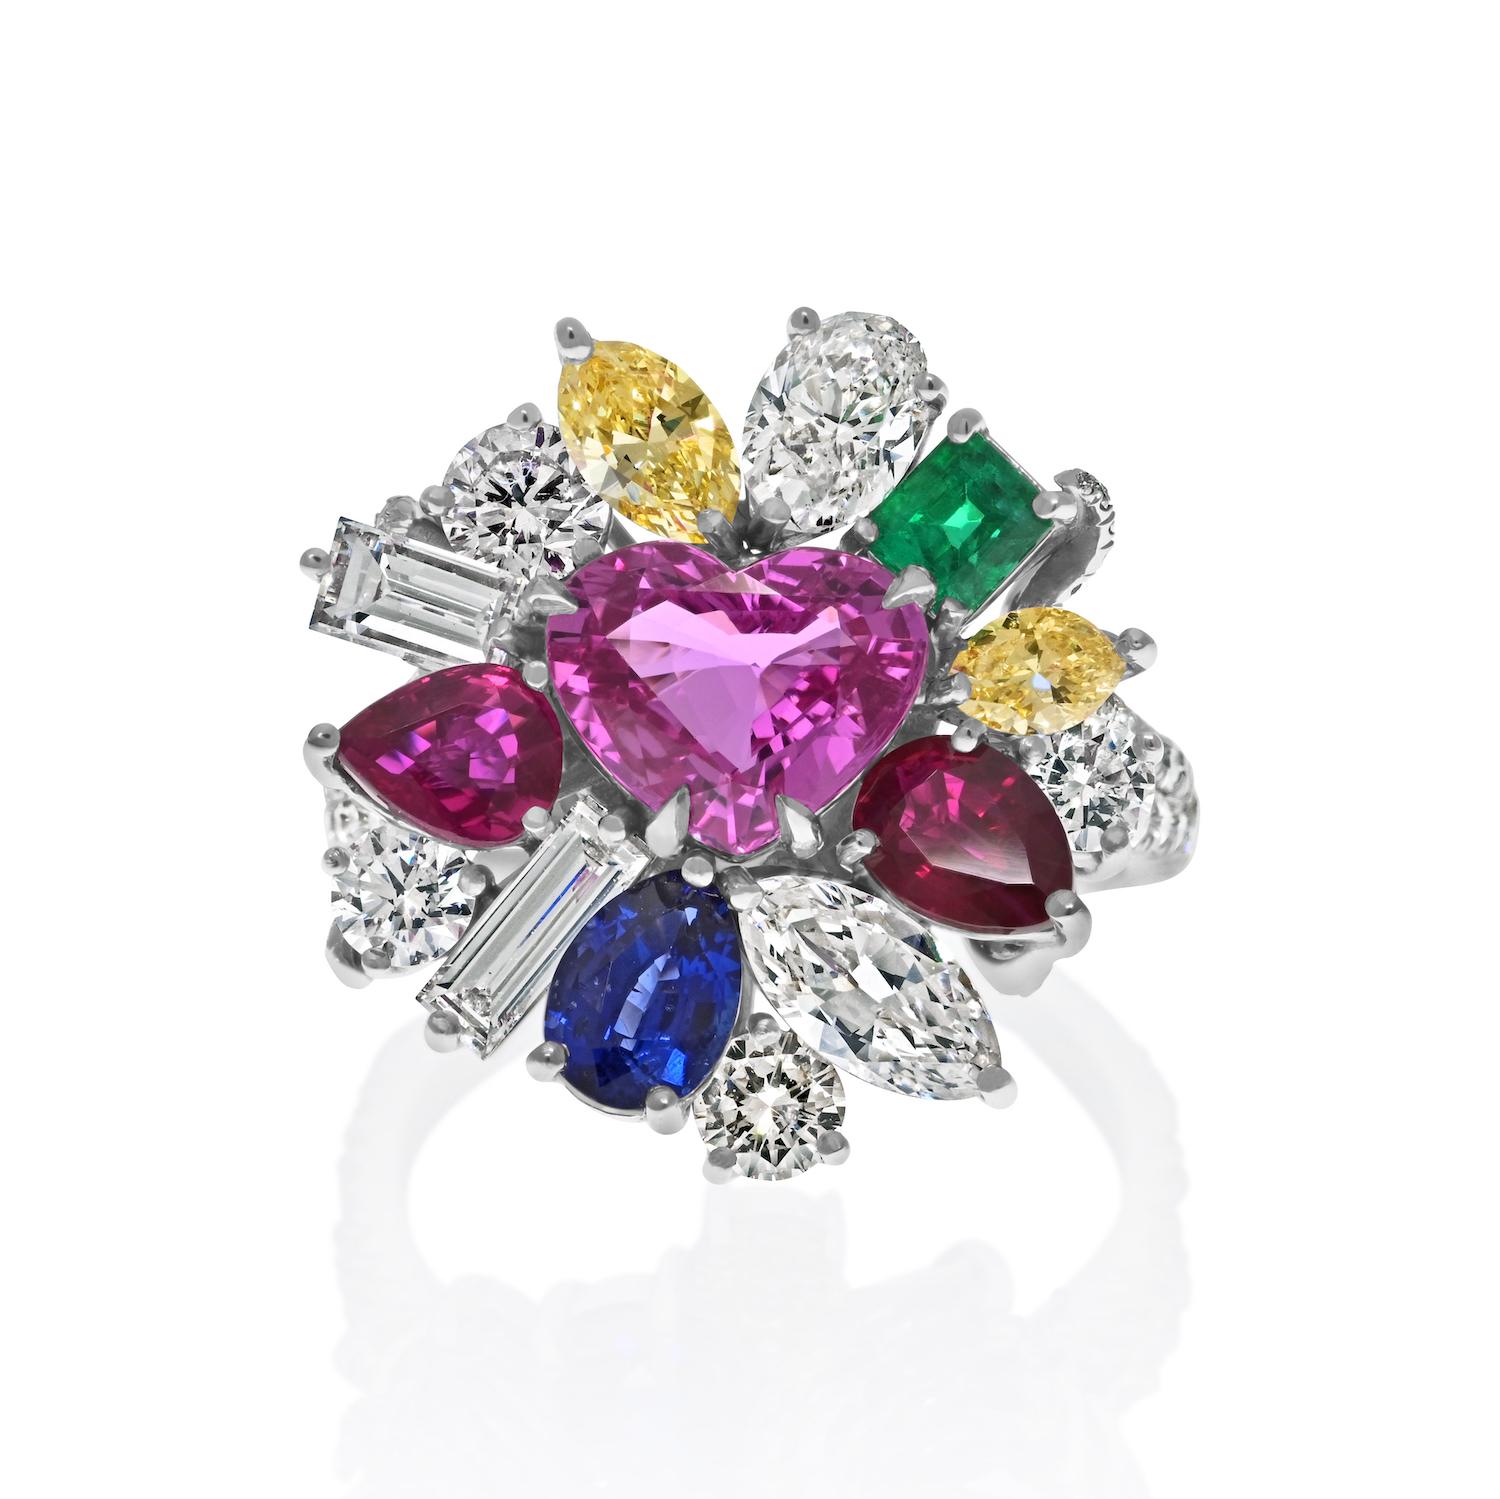 The Essence of Fun: Tutti Frutti Cocktail Ring.

At our workshop, we've always embraced the idea that jewelry should be as joyful and vibrant as life itself. Our personal definition of 